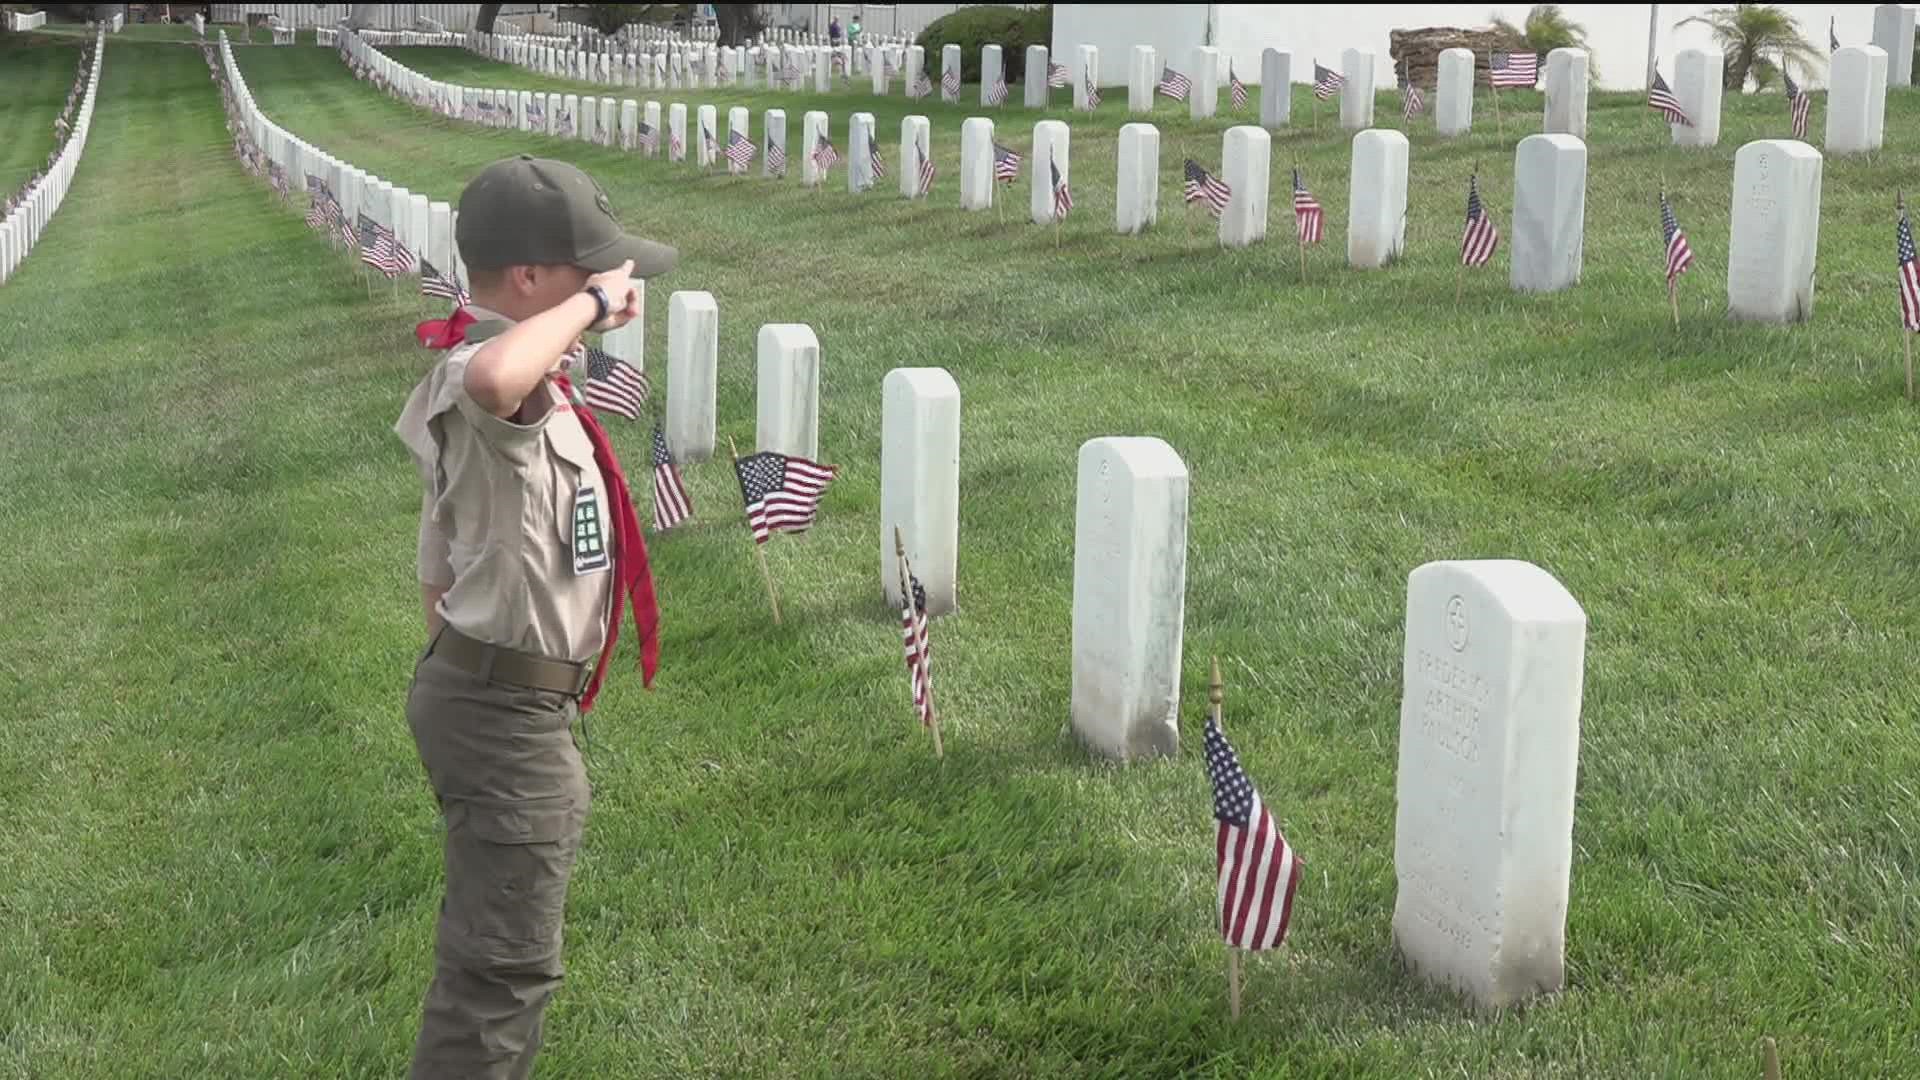 San Diego boy scouts, girl scouts and volunteers placed American flags on the tombstones of those who once served our country.